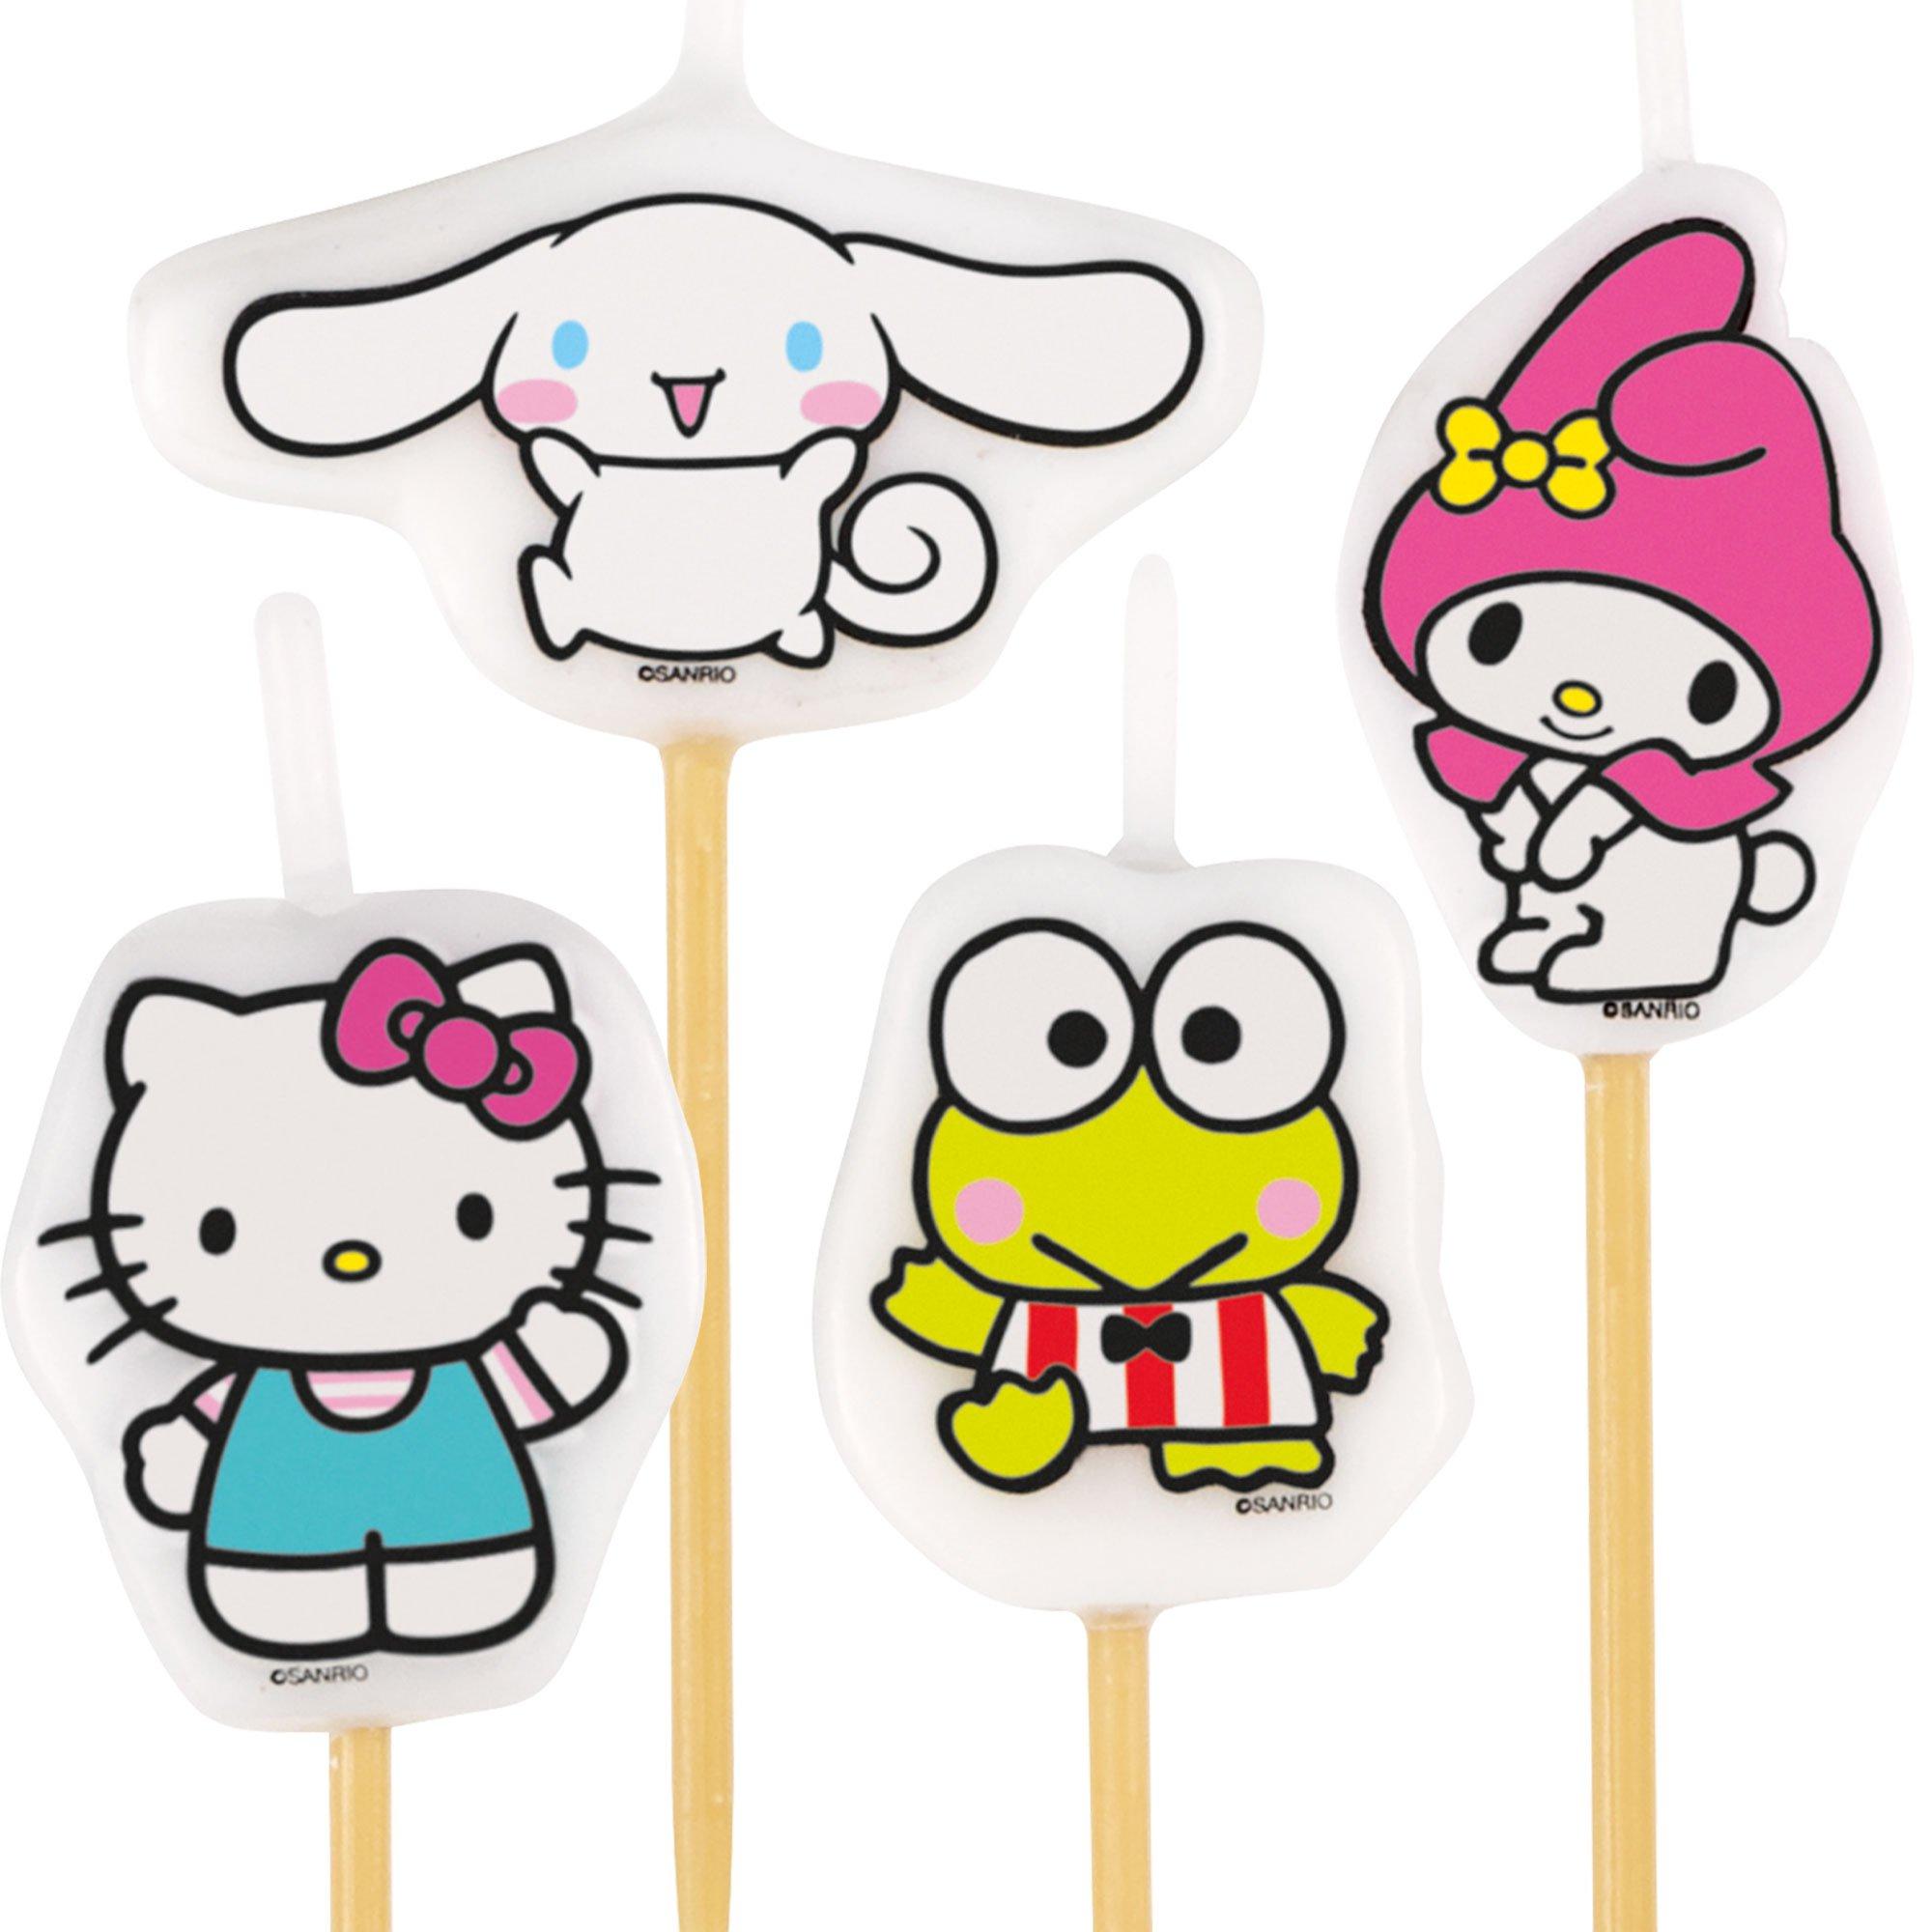 Hello Kitty and Friends Candle Pick Set, 4pc - Sanrio